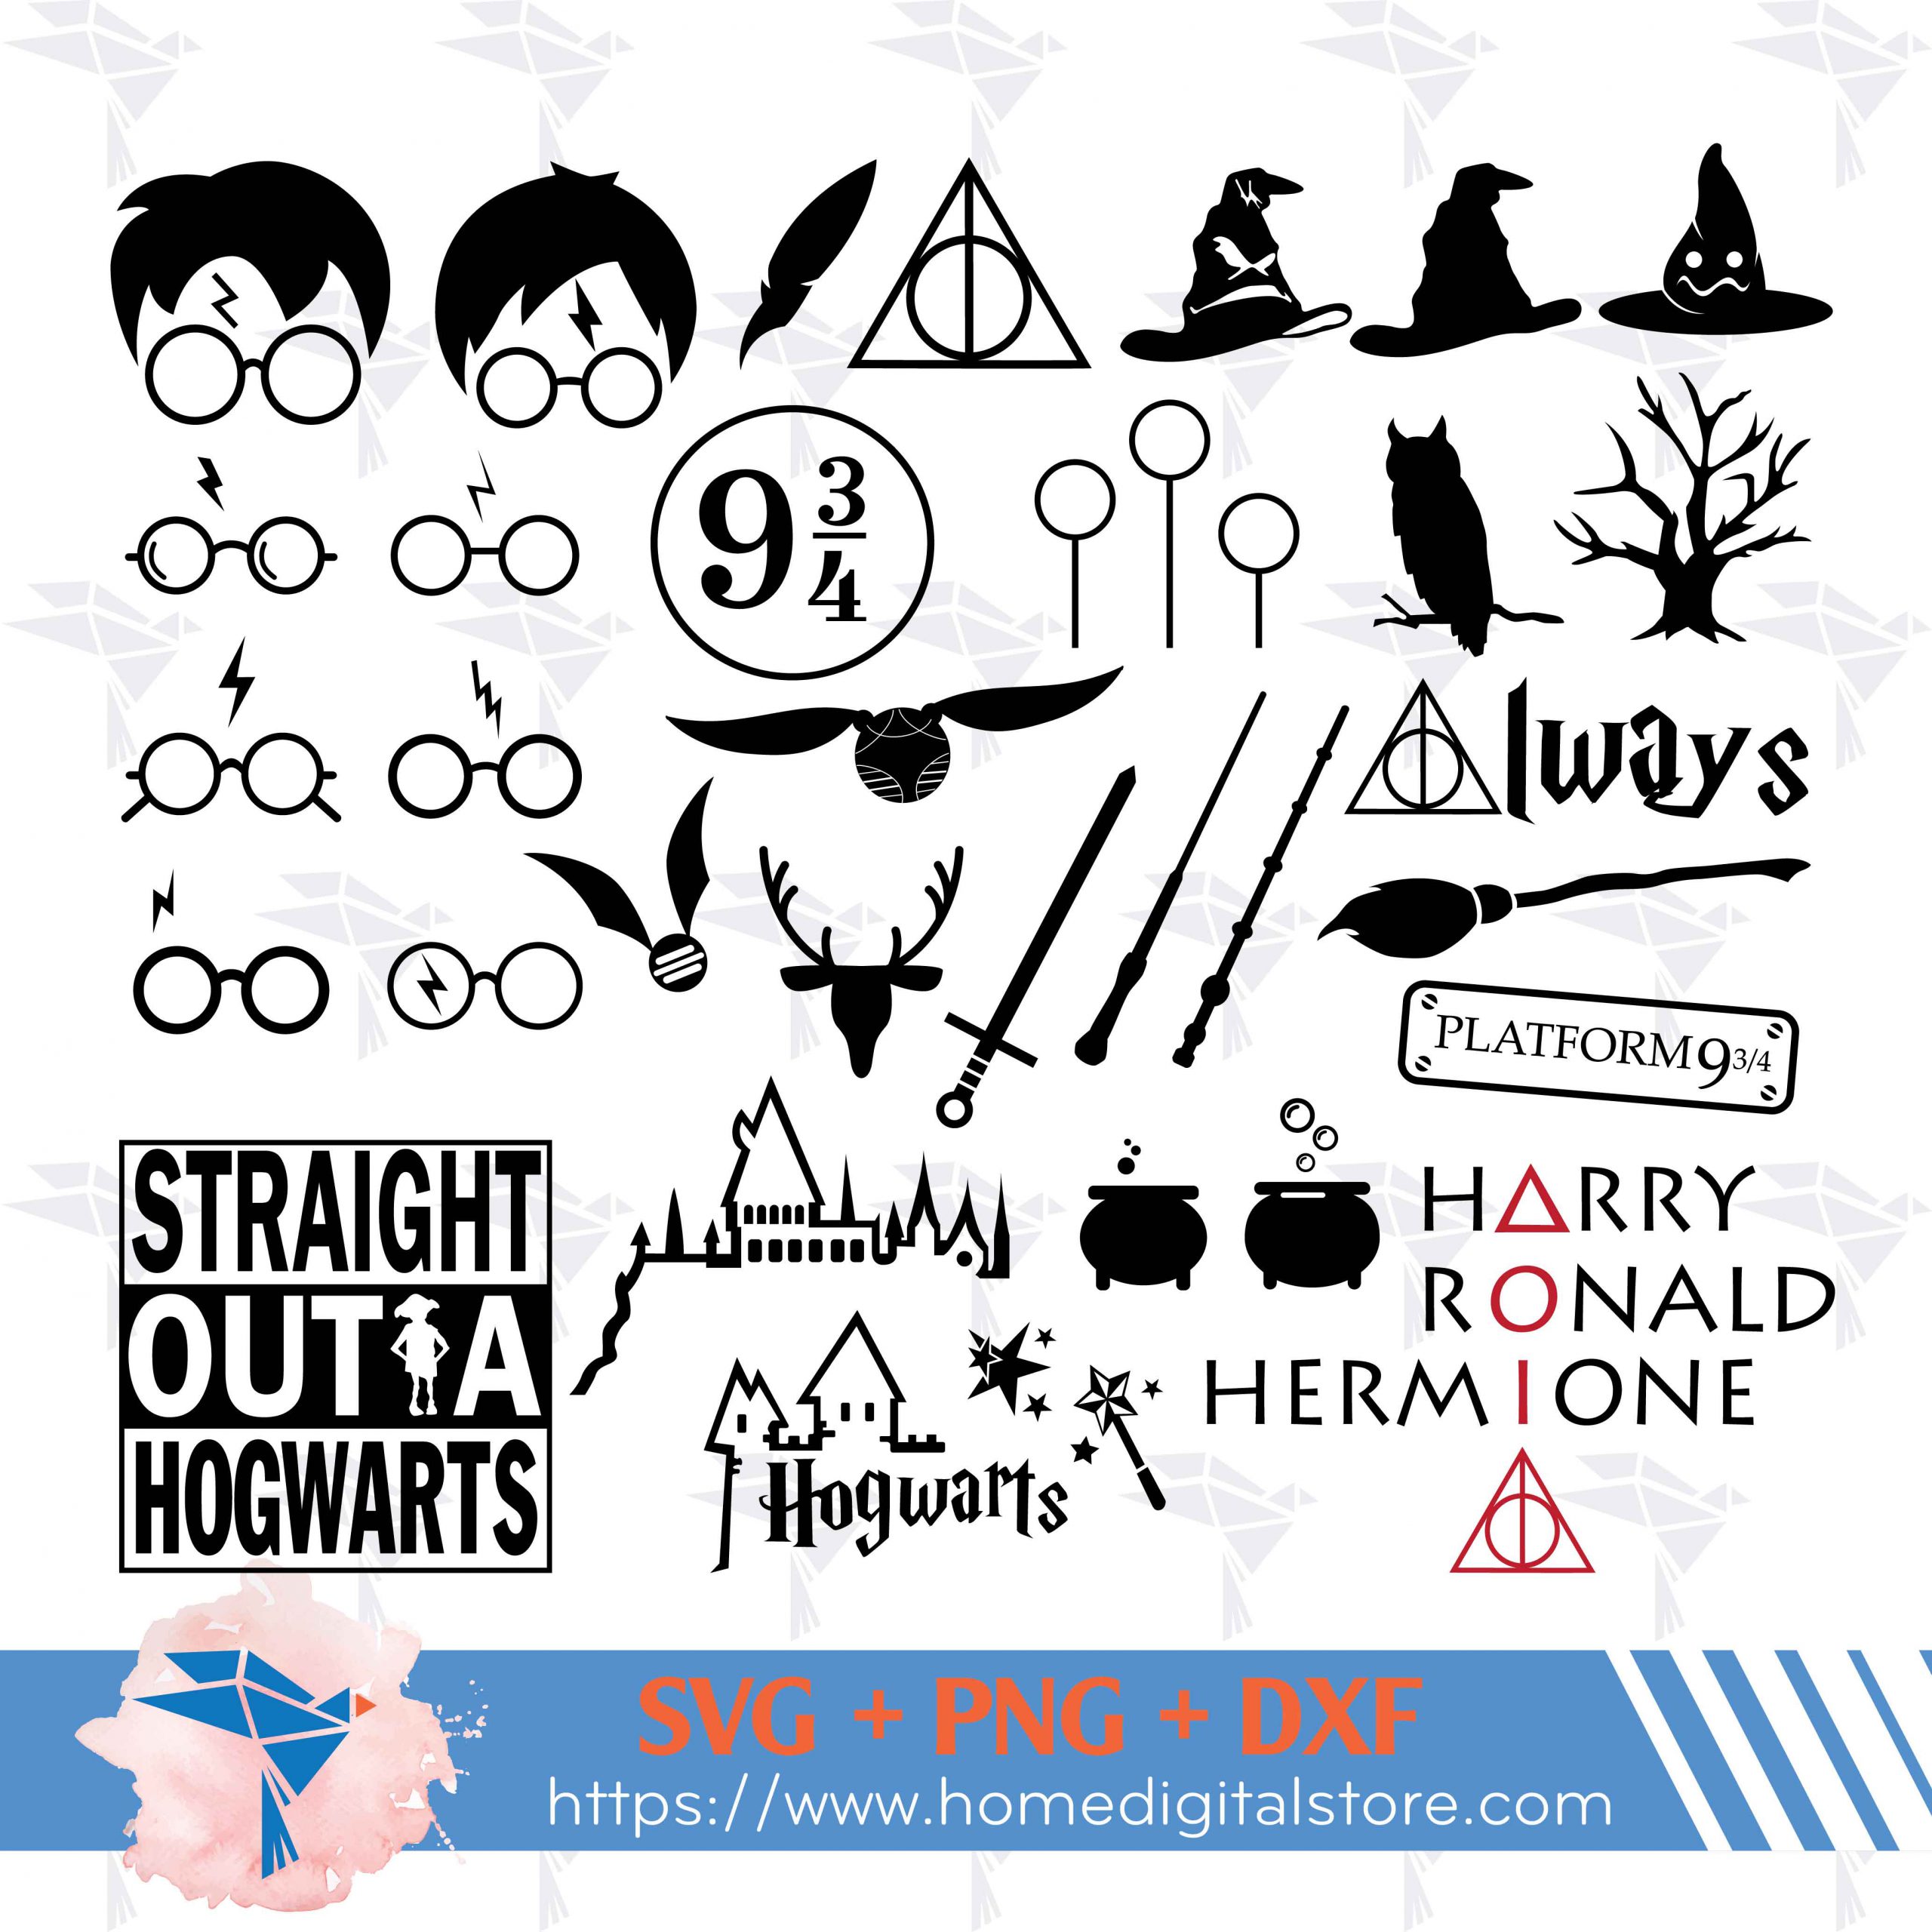 Harry potter svg free, harry svg, free vector files, silhouette cameo,  silhouette cameo, shirt design, harry potter cut file, png, dxf 0829 –  freesvgplanet